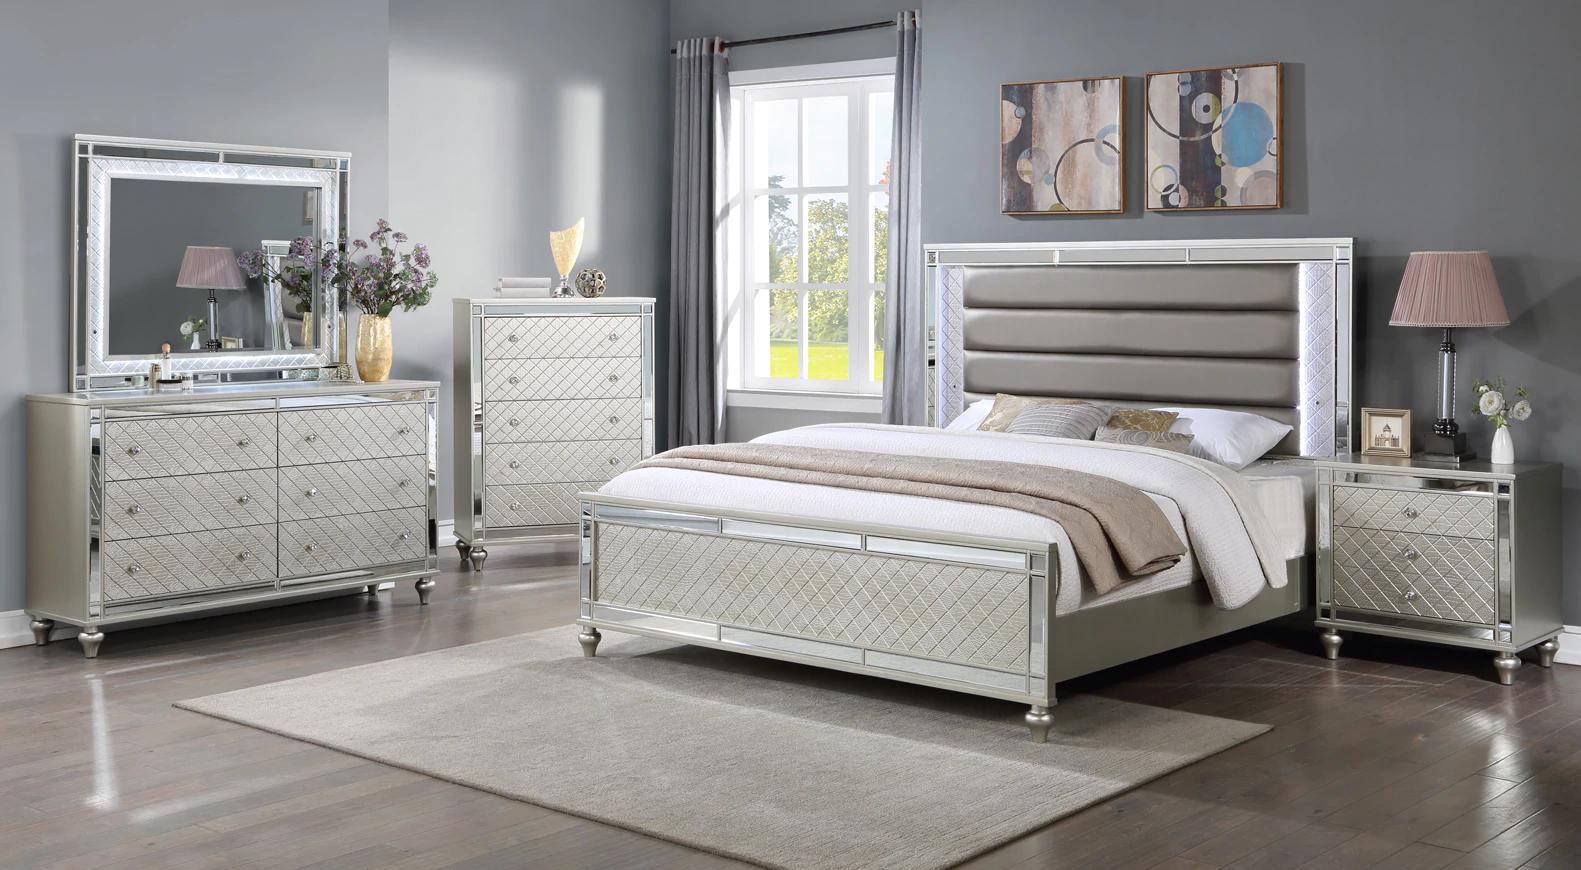 Modern Panel Bedroom Set Cristian B1680-Q-Bed-6pcs in White, Champagne Crocodile Texture